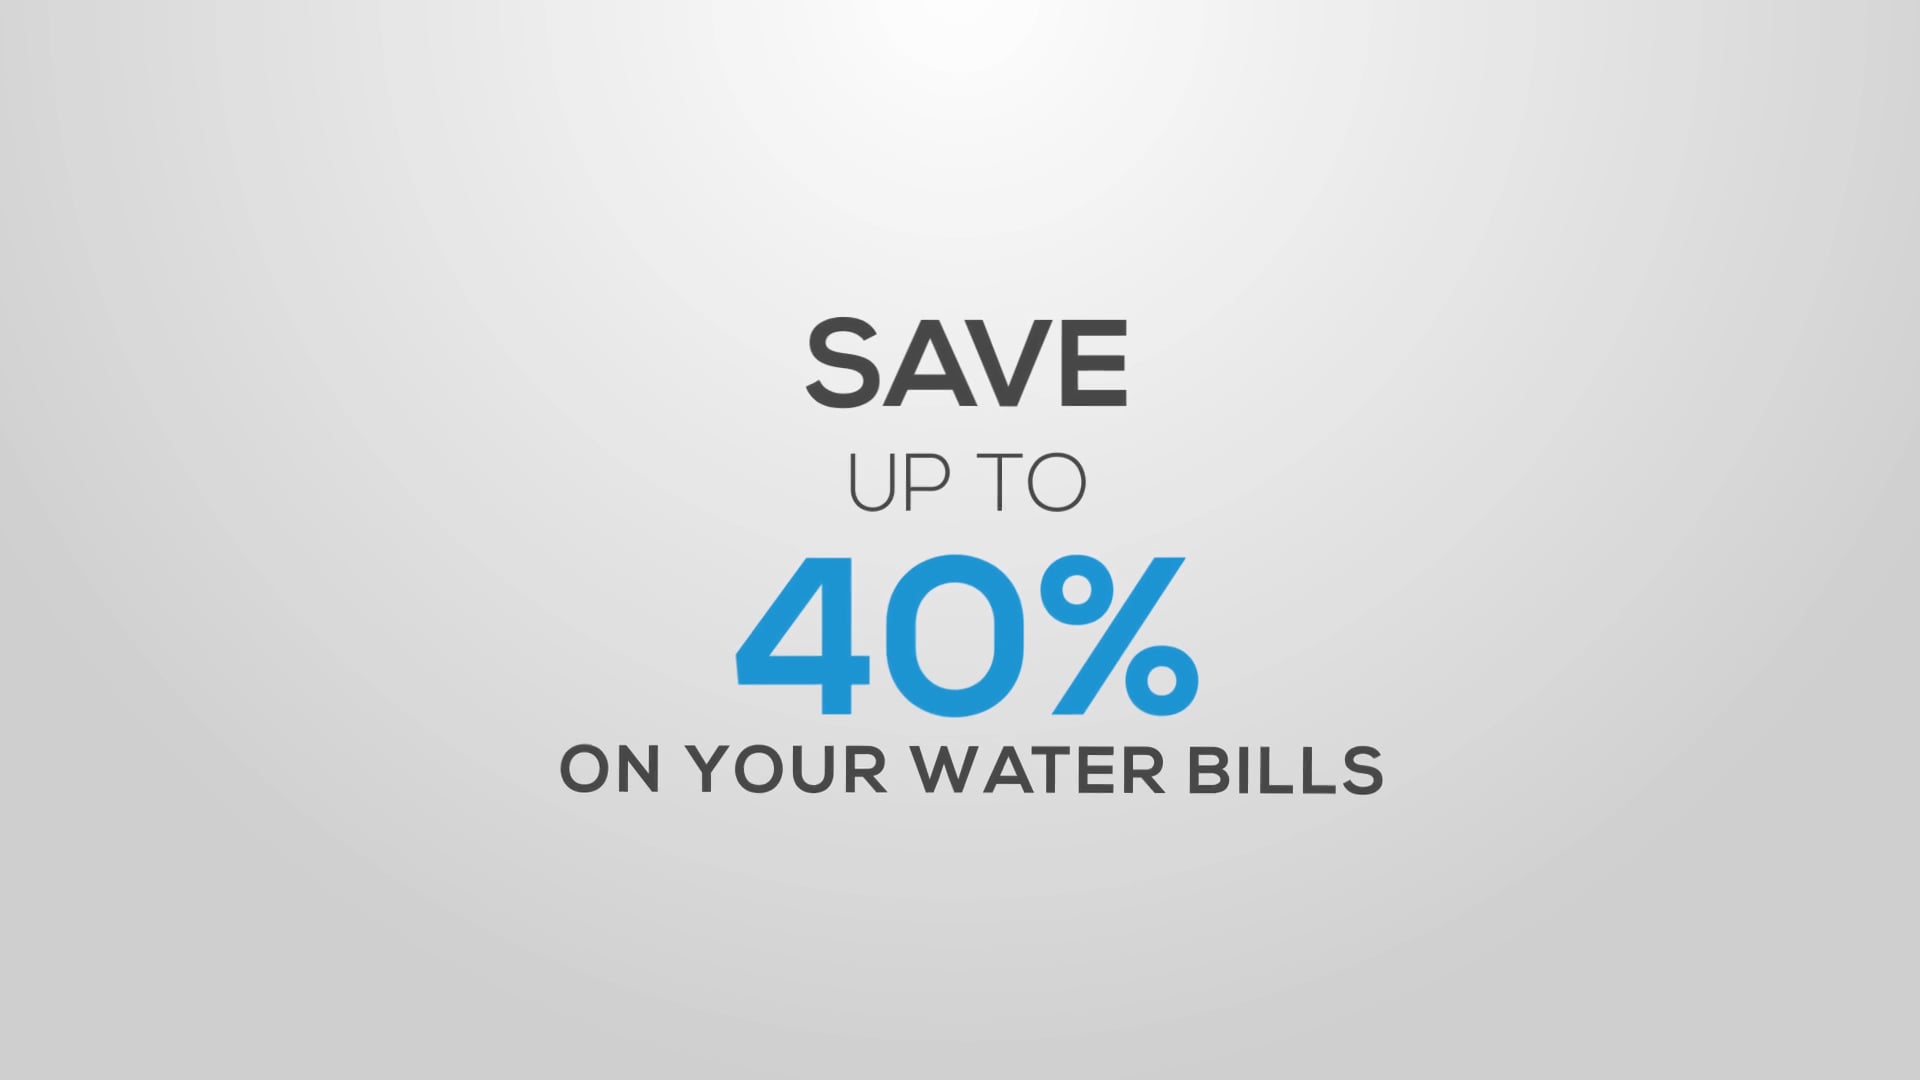 save-up-to-40-on-your-water-bill-on-vimeo